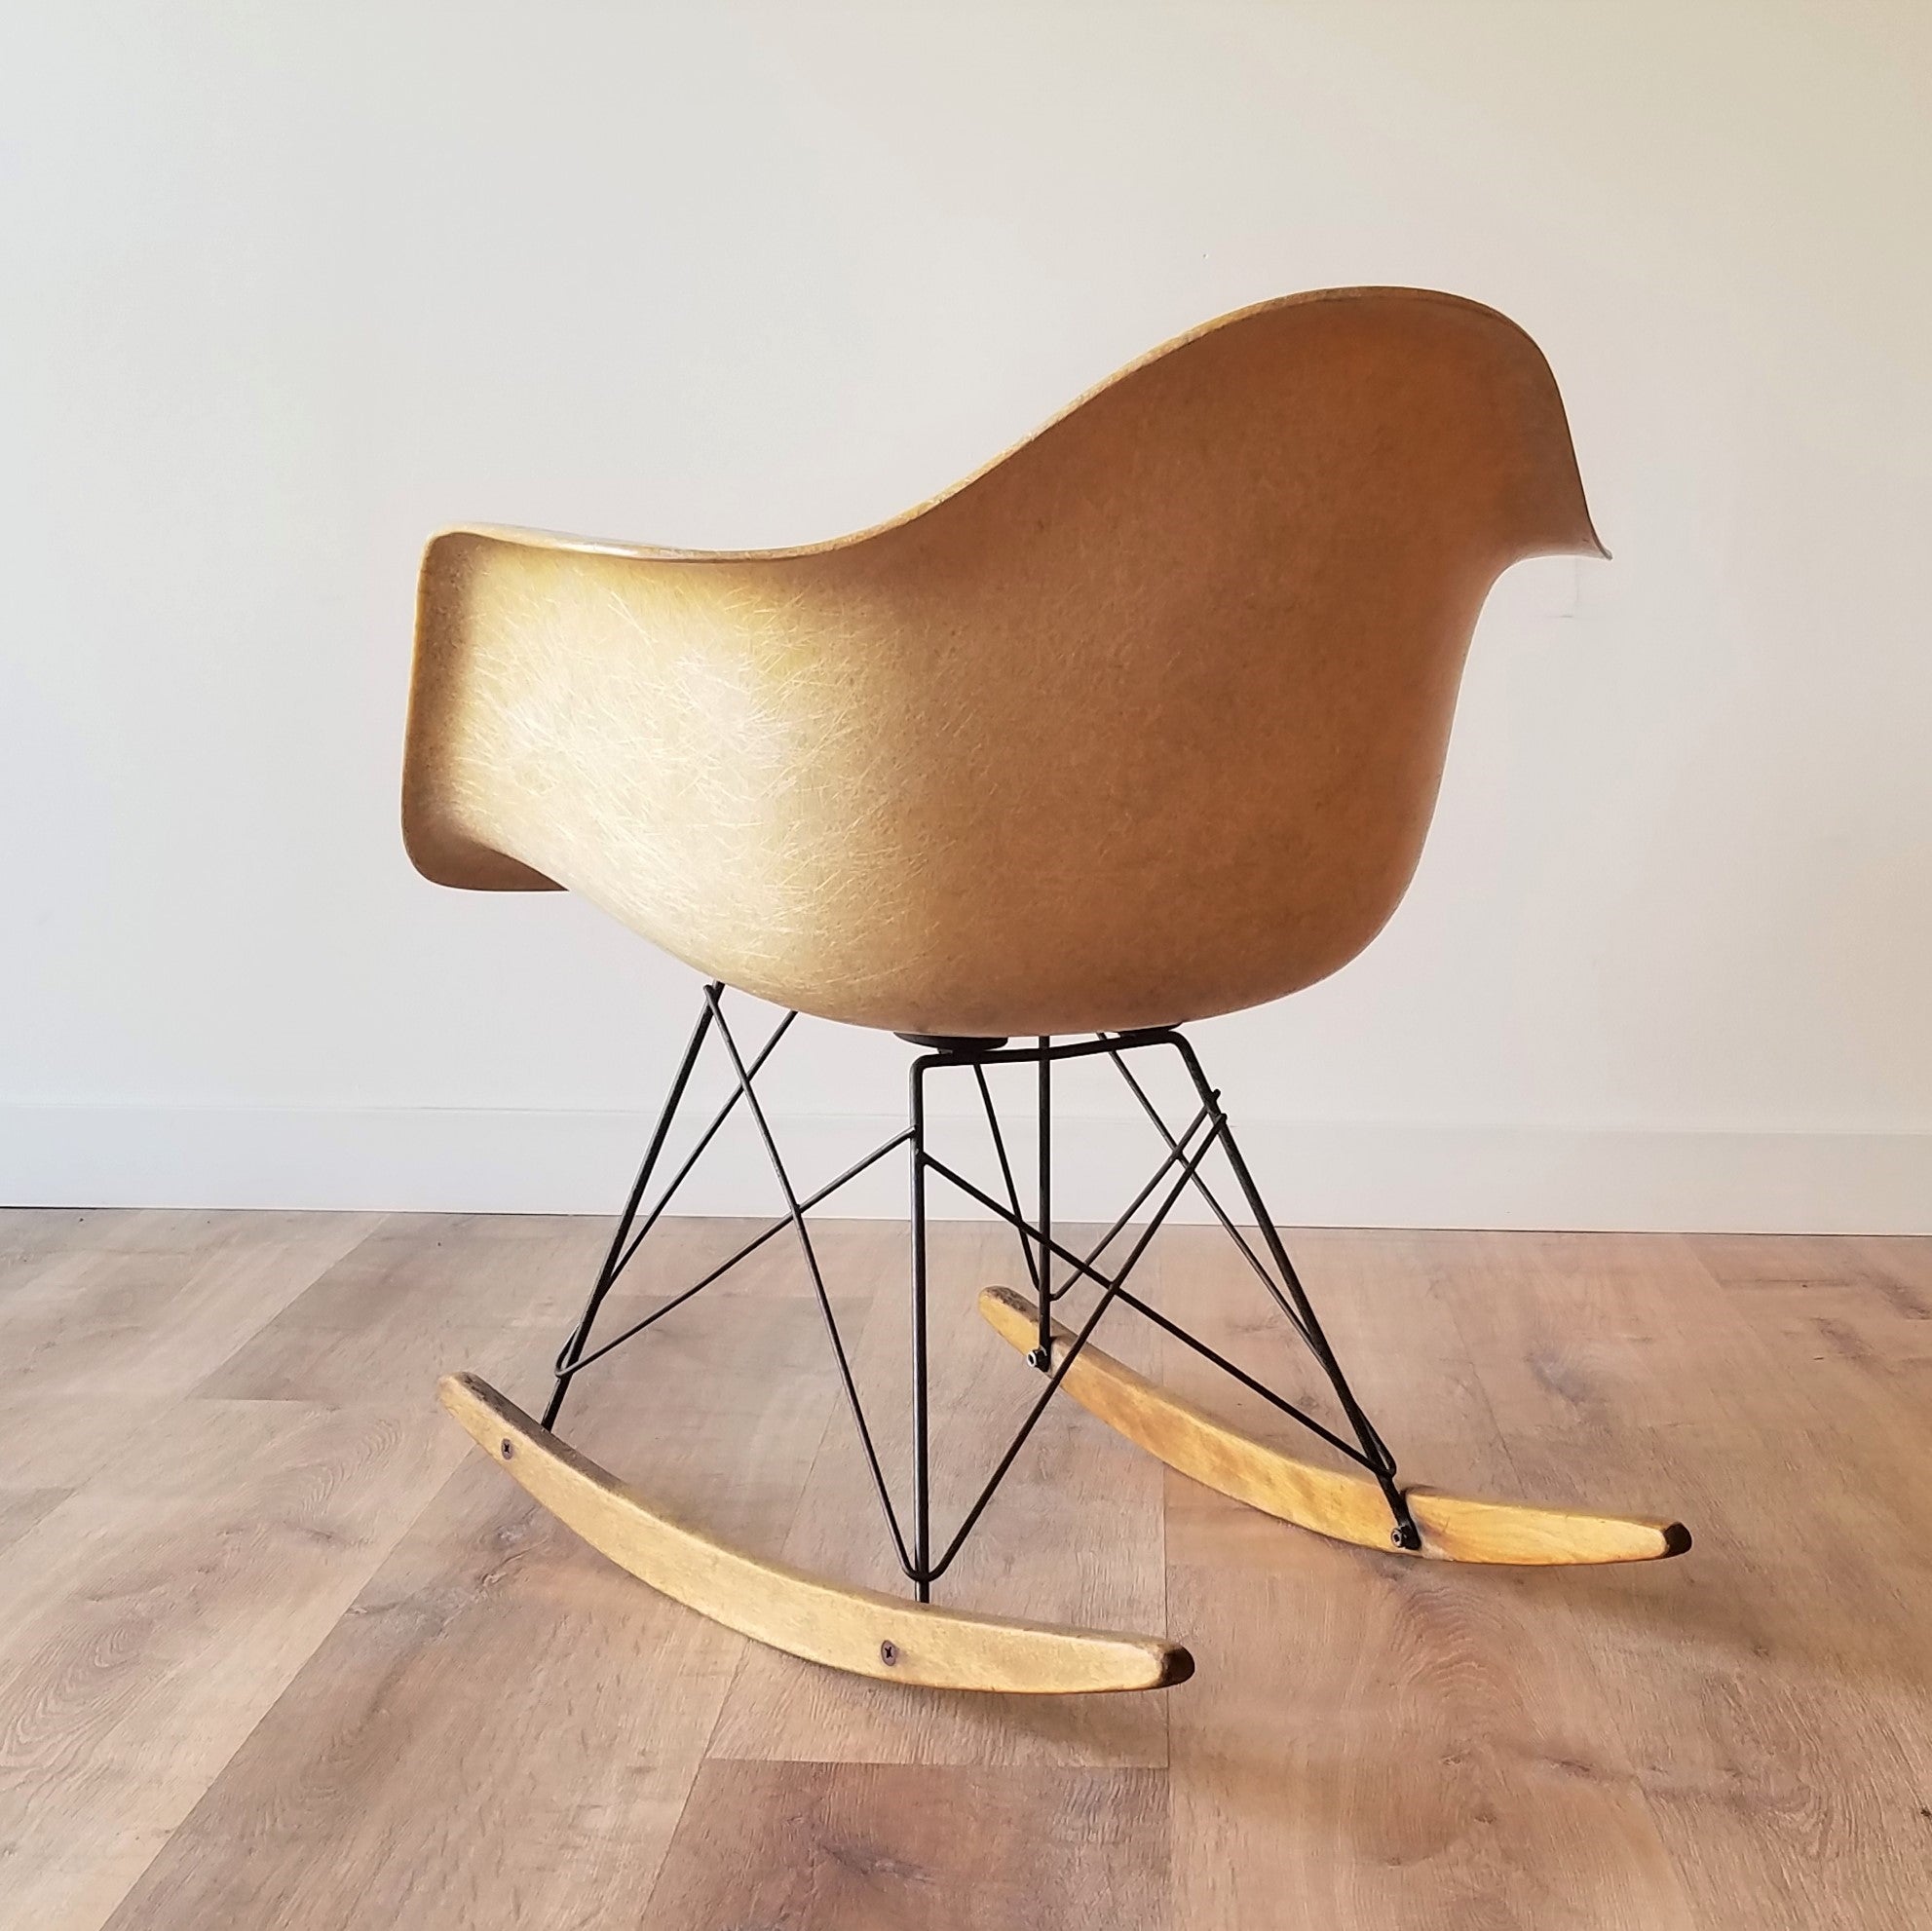 Back Quarter View of American Mid-Century Modern 1960s RAR Rocker by Charles and Ray Eames in Seattle, Washington.